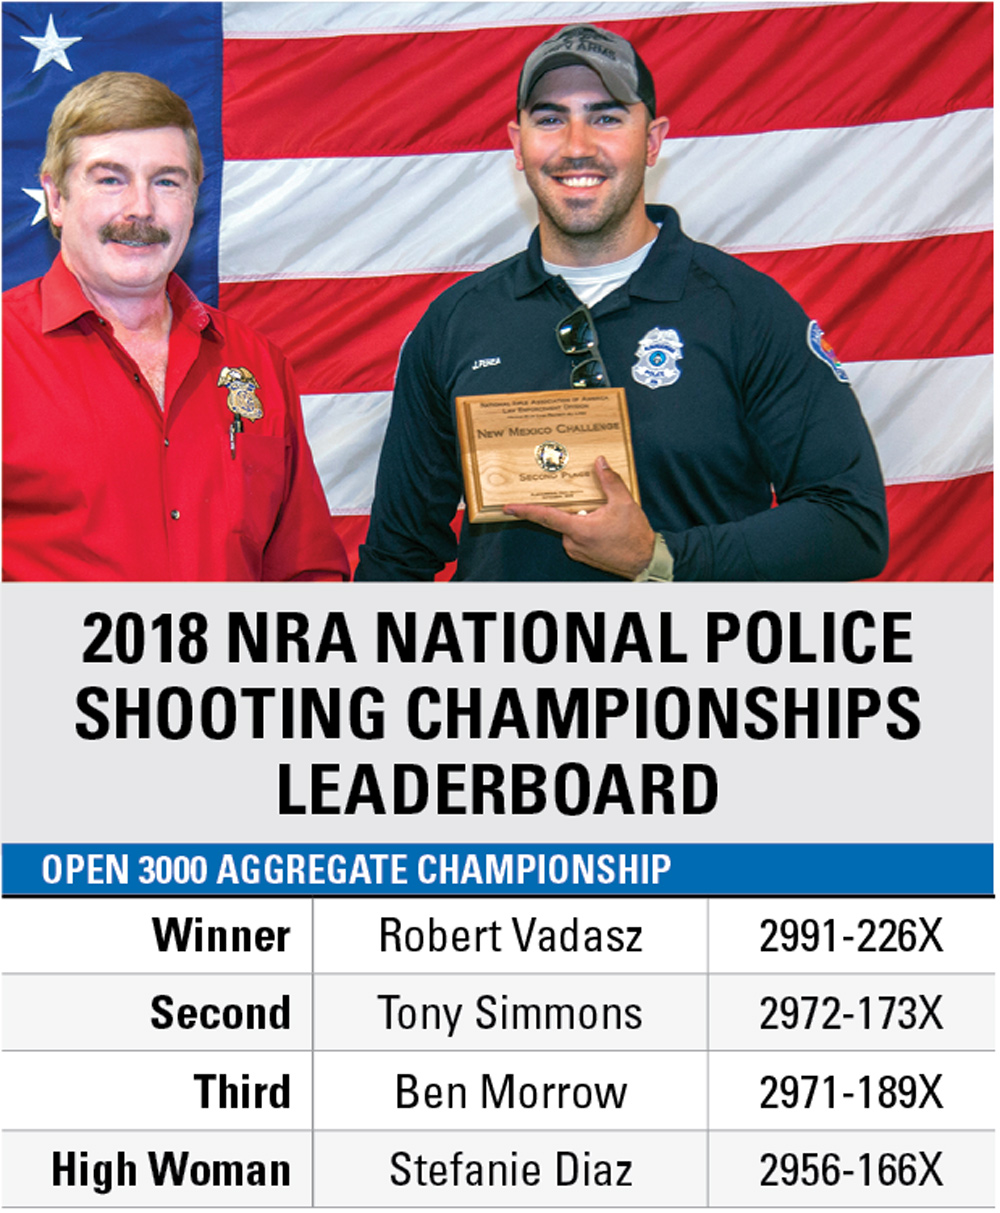 2018 NRA National Police Shooting Championships Leaderboard